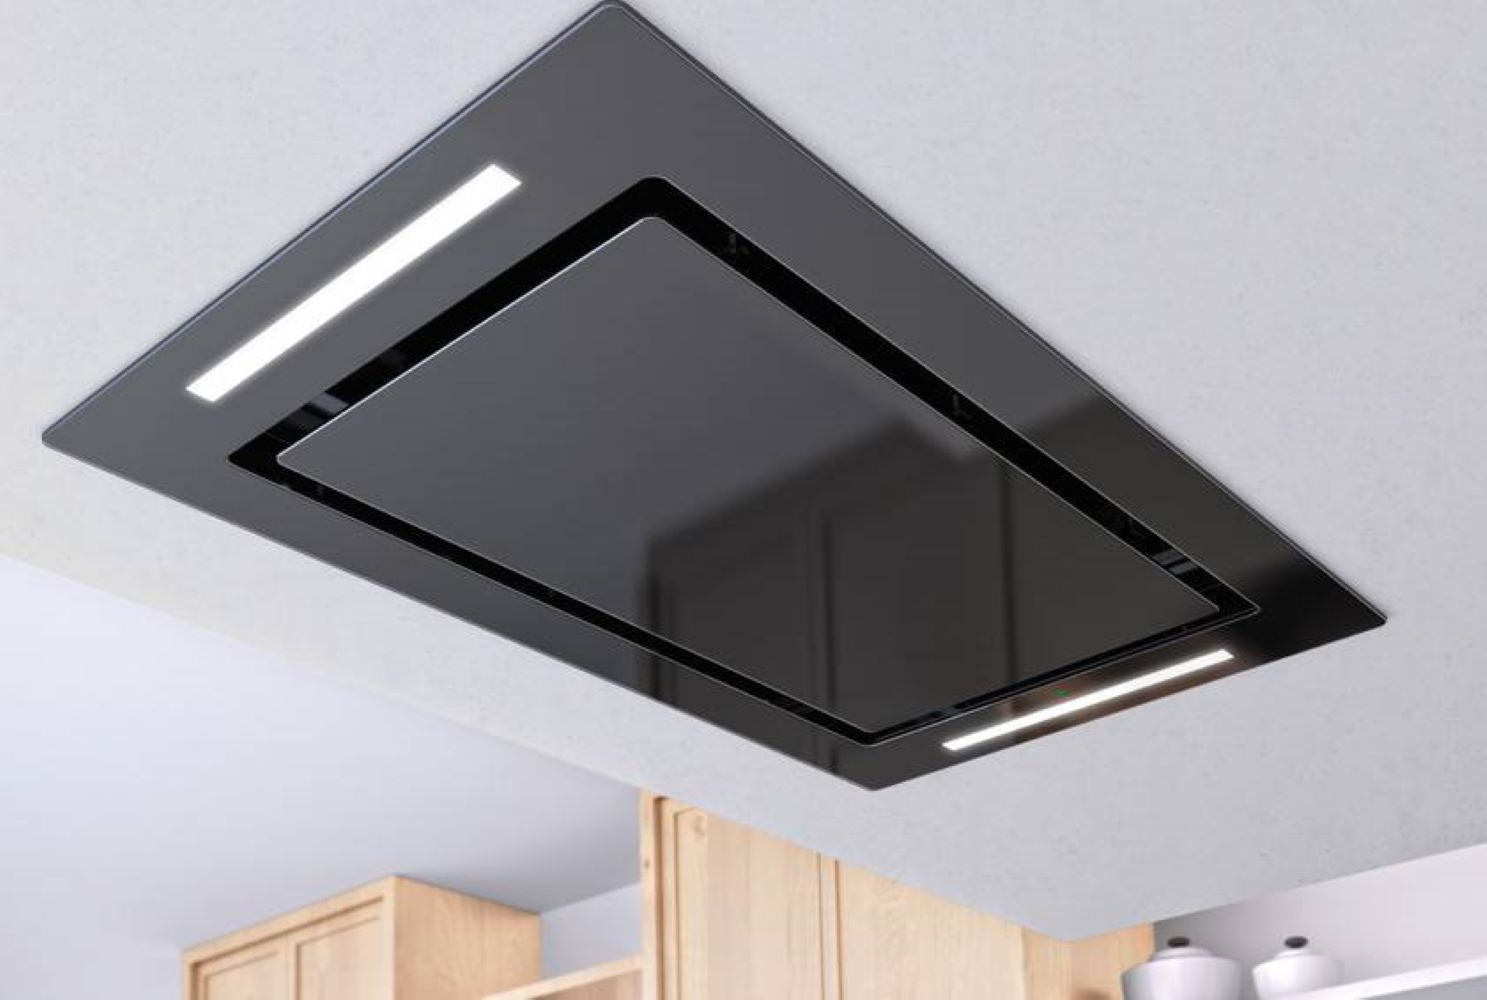 Airforce F171 FLAT 100cm Ceiling Cooker Hood with Remote Control - Black Glass